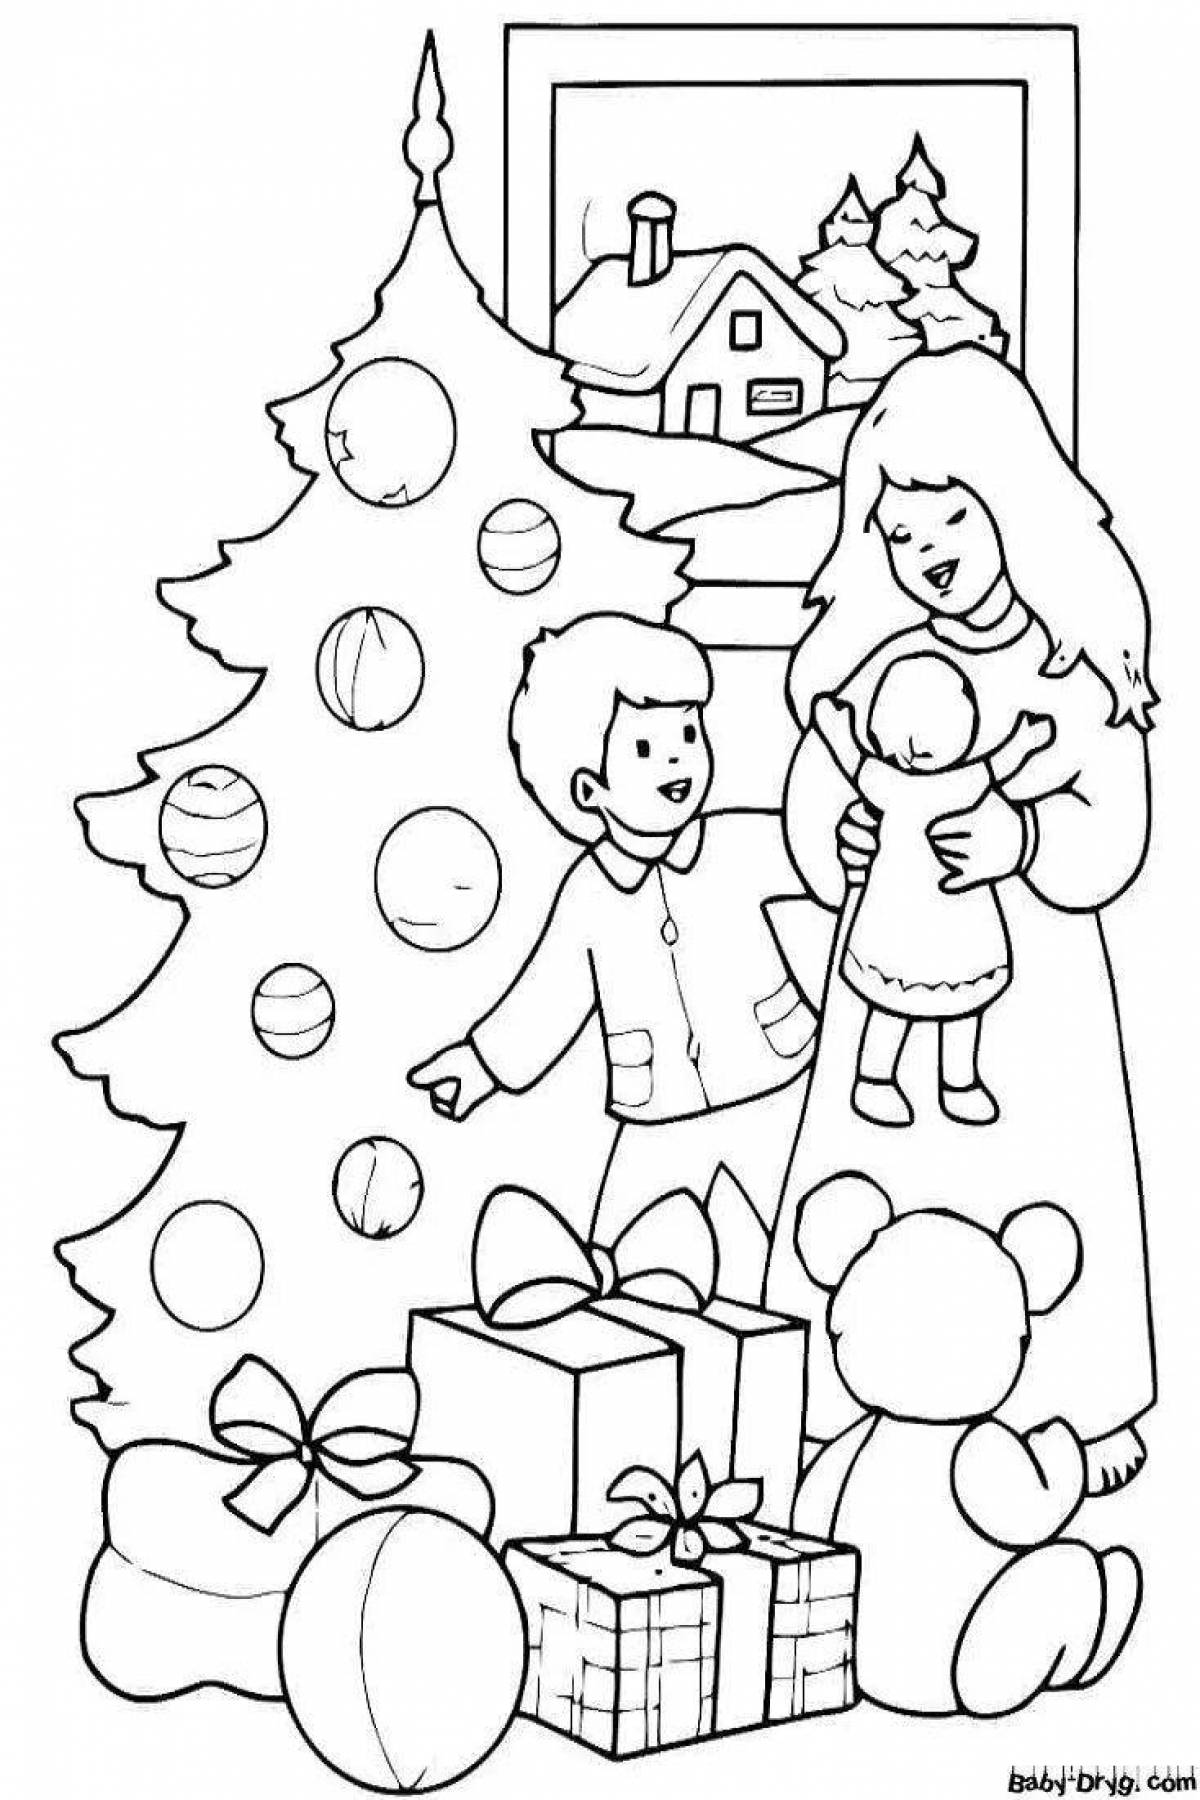 Exotic Christmas coloring book